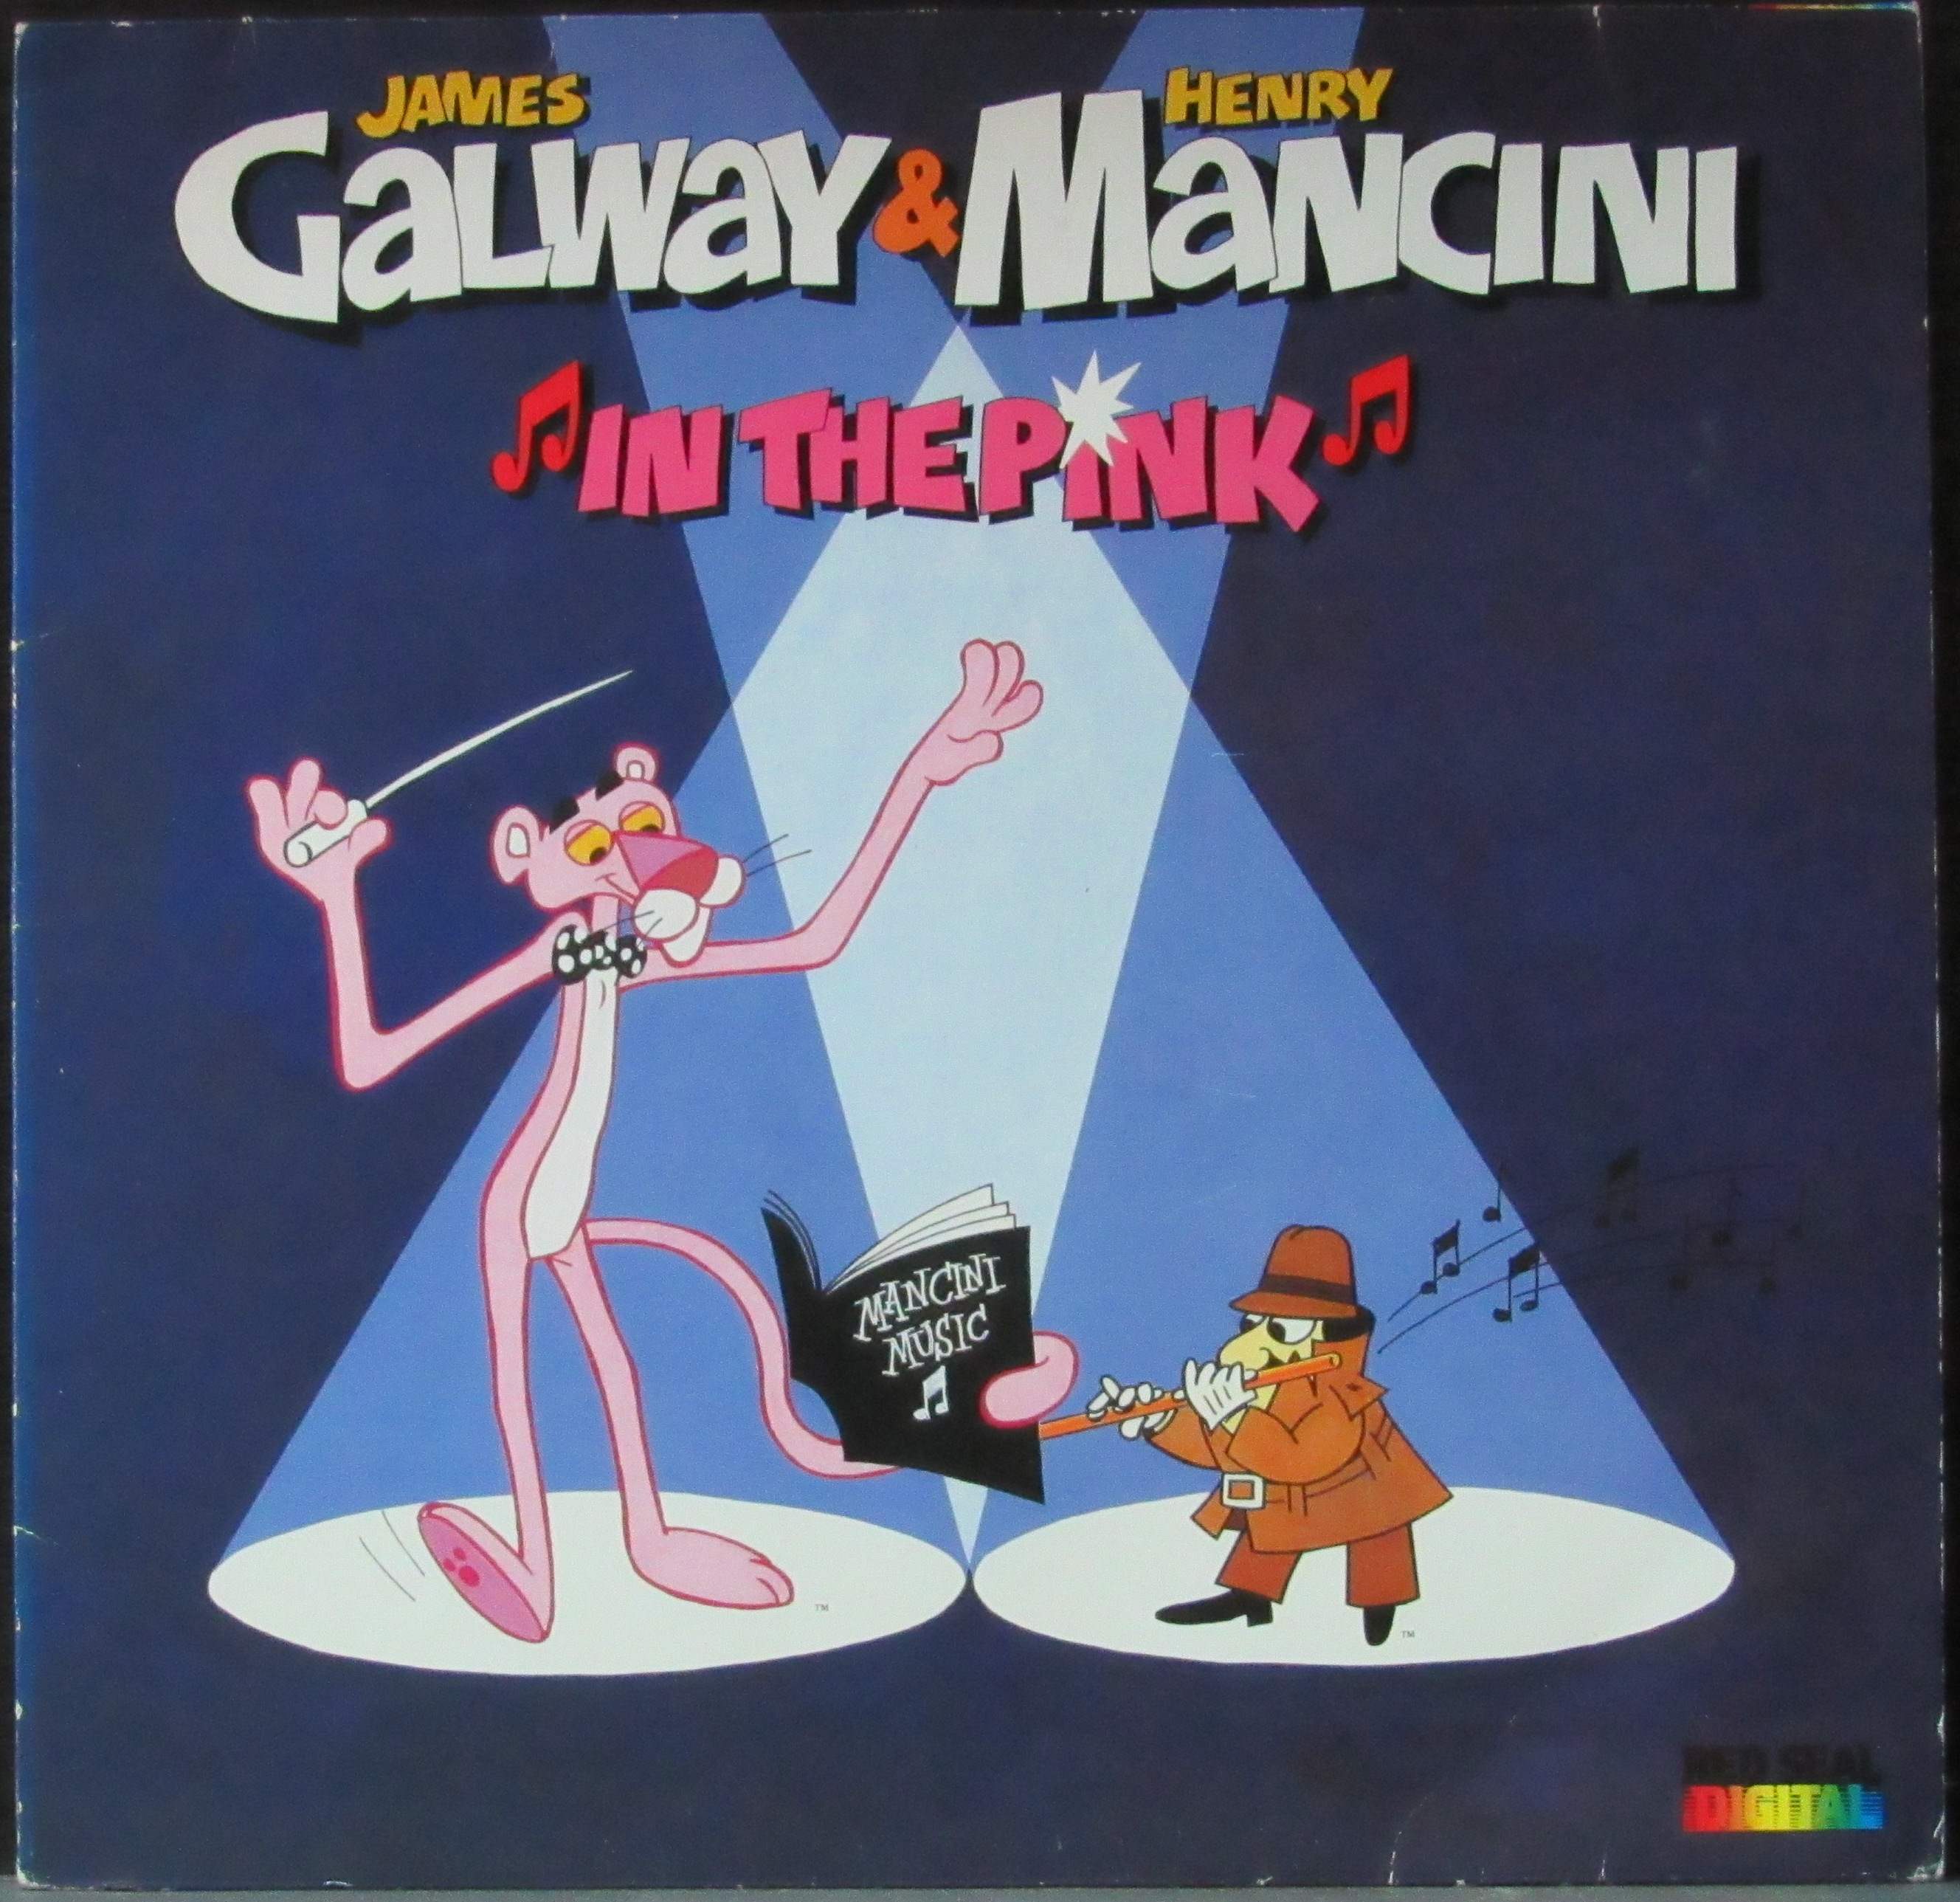 Henry mancini the pink panther. Henry Mancini in the Pink. Henry Mancini -the Pink Panther (Original)1963 альбом. The Pink Panther Pinkadelic. Henry Mancini Hits - Henry Mancini - Crazy World.